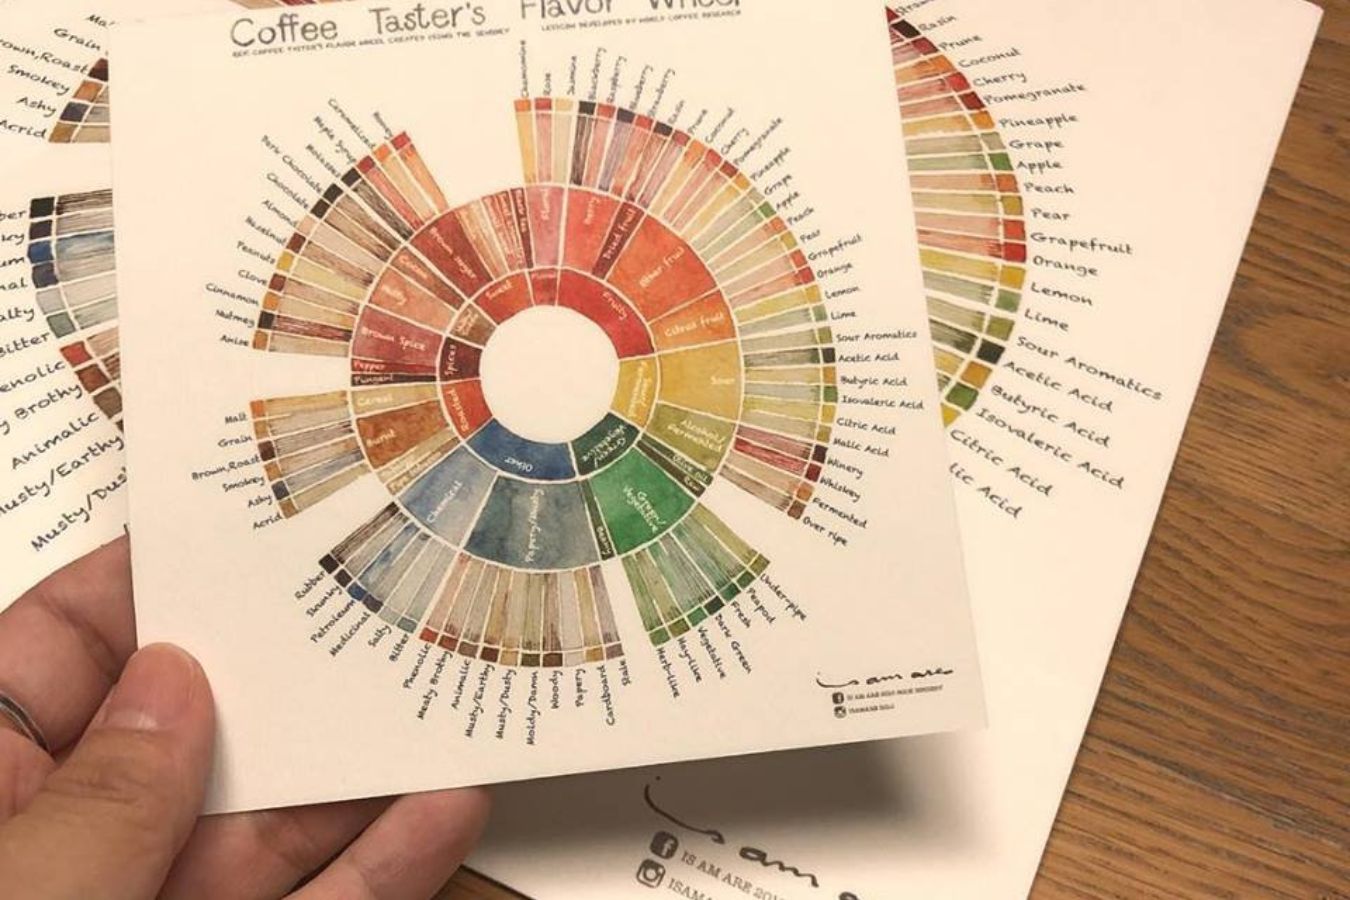 How To Use Coffee Taster’s Flavor Wheel